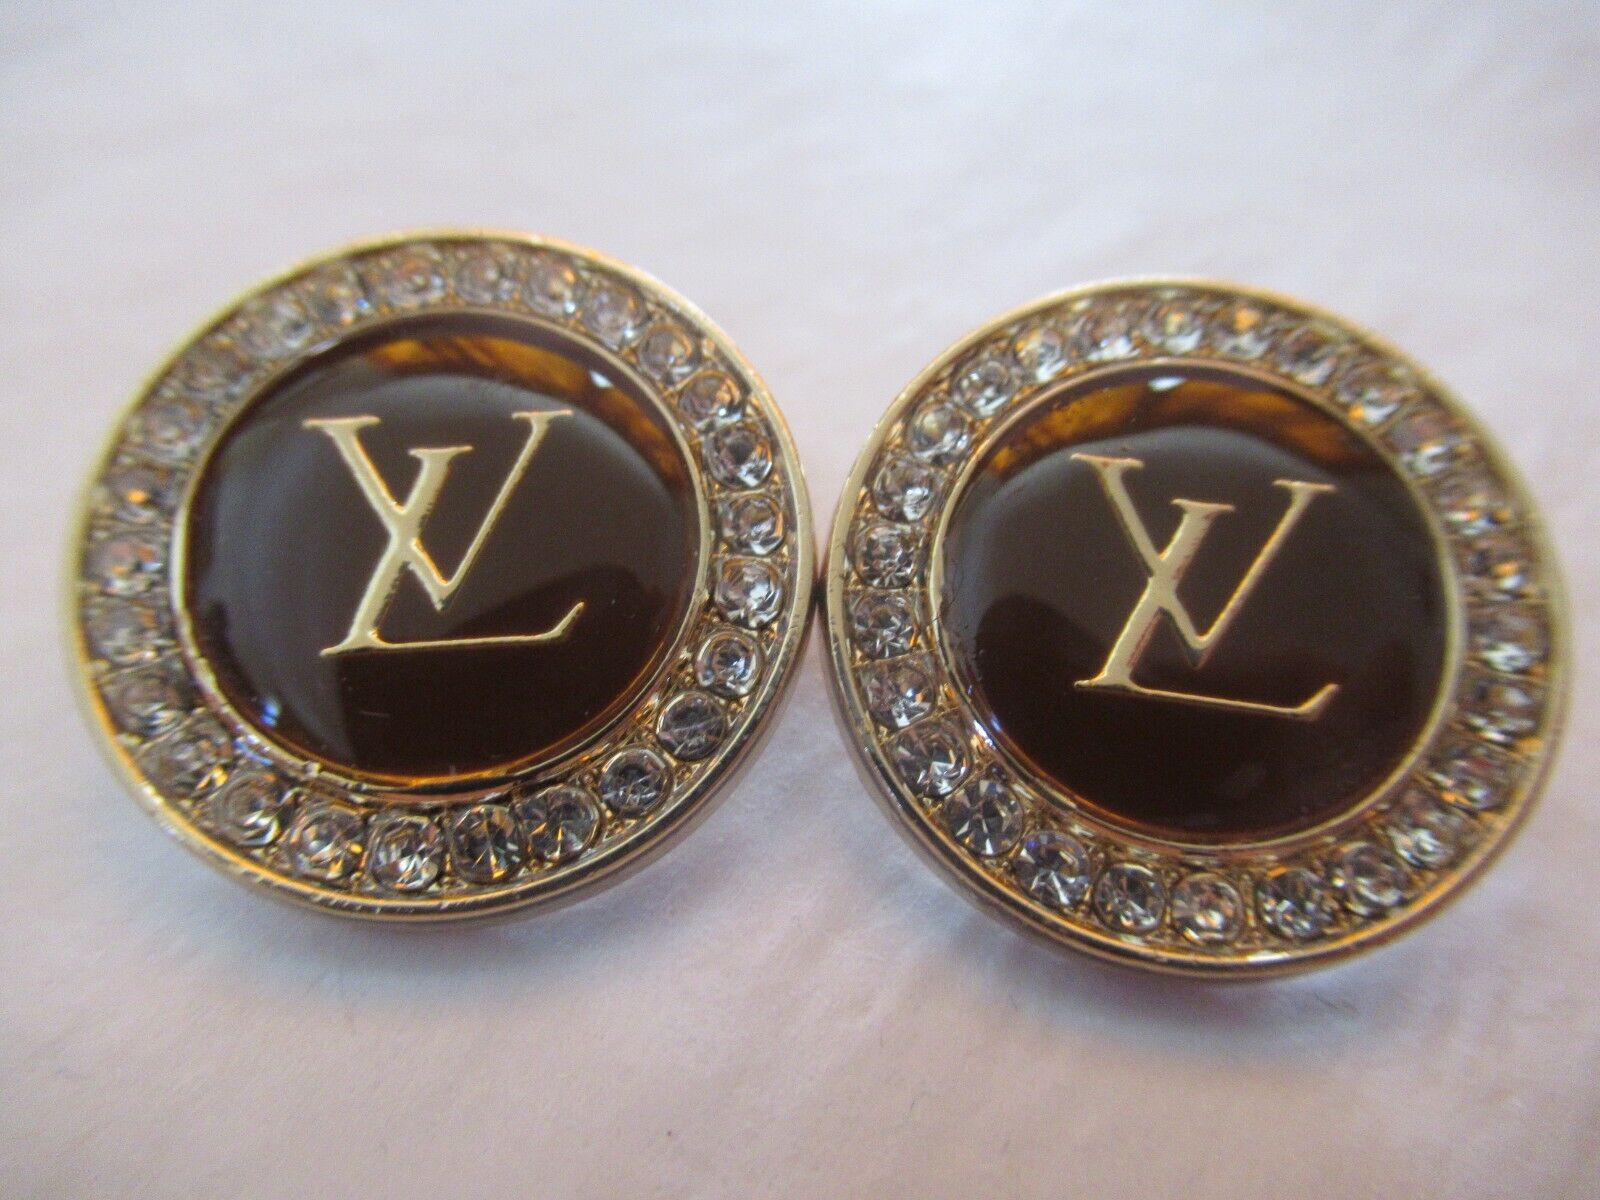 LOUIS VUITTON LV 2 buttons BROWN GOLD tone metal , CRYSTALS 22mm